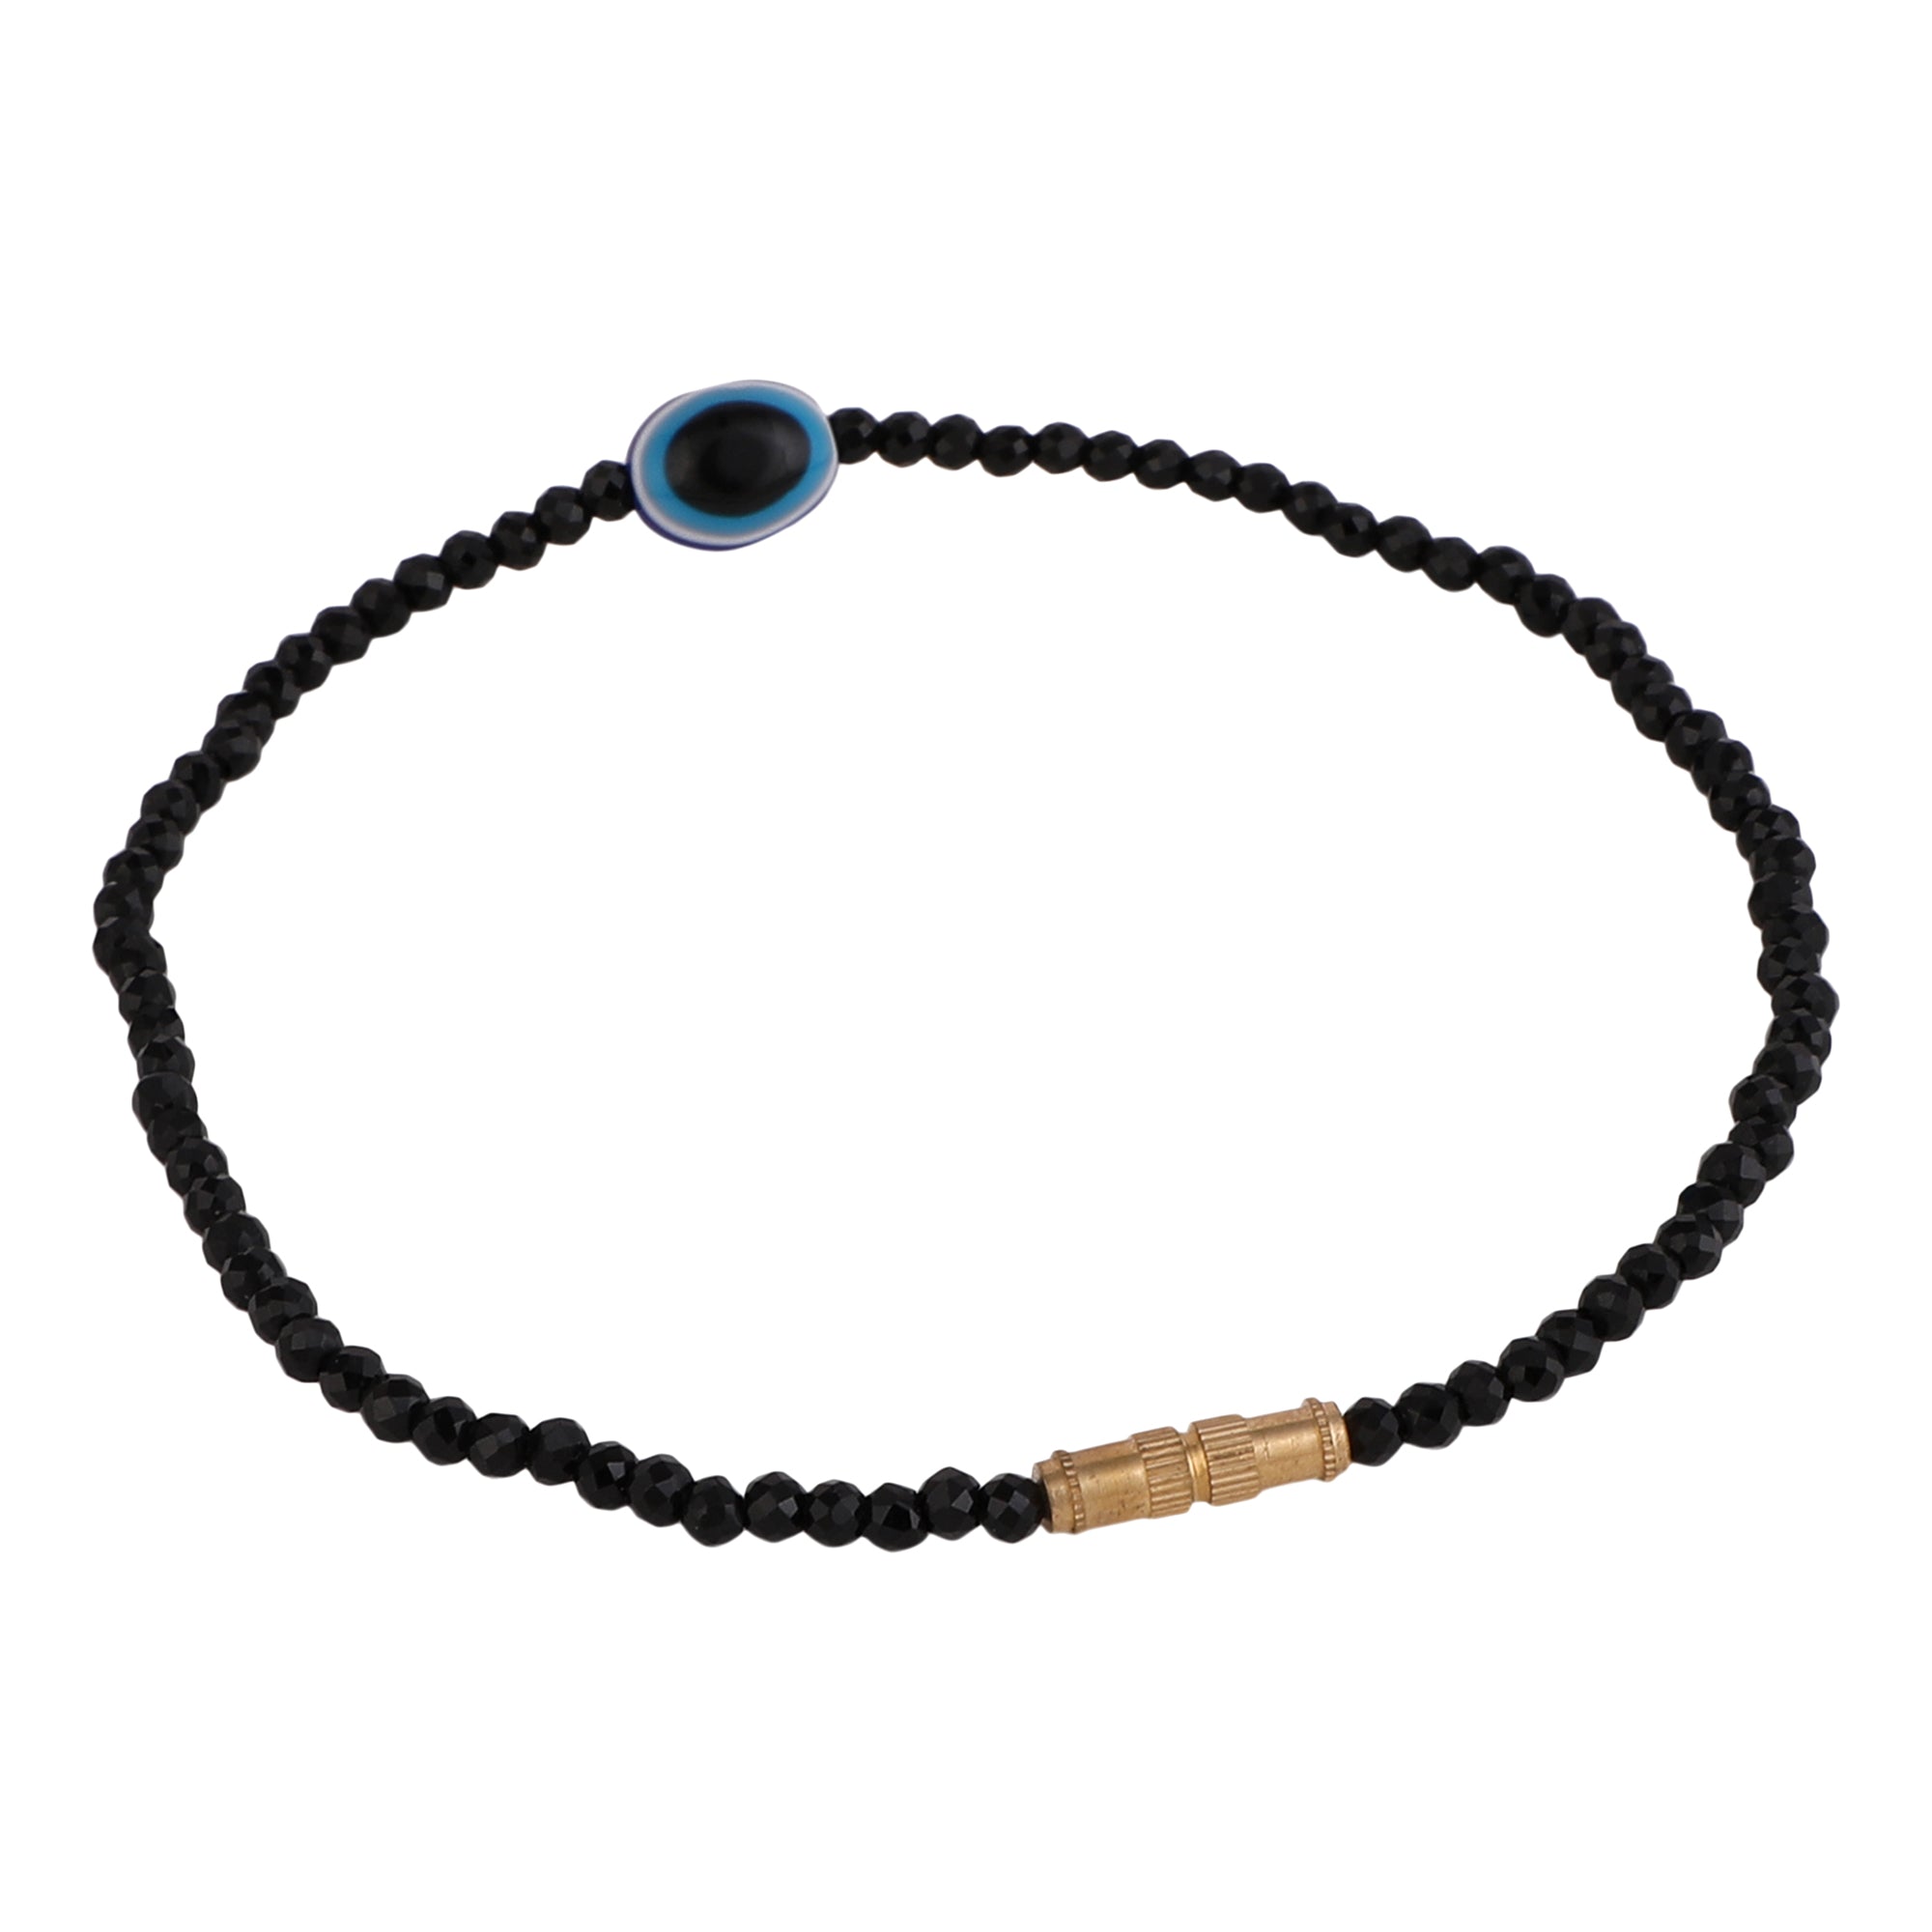 Women's Contemporary Evil Eye Black Beads Anklets - MODE MANIA